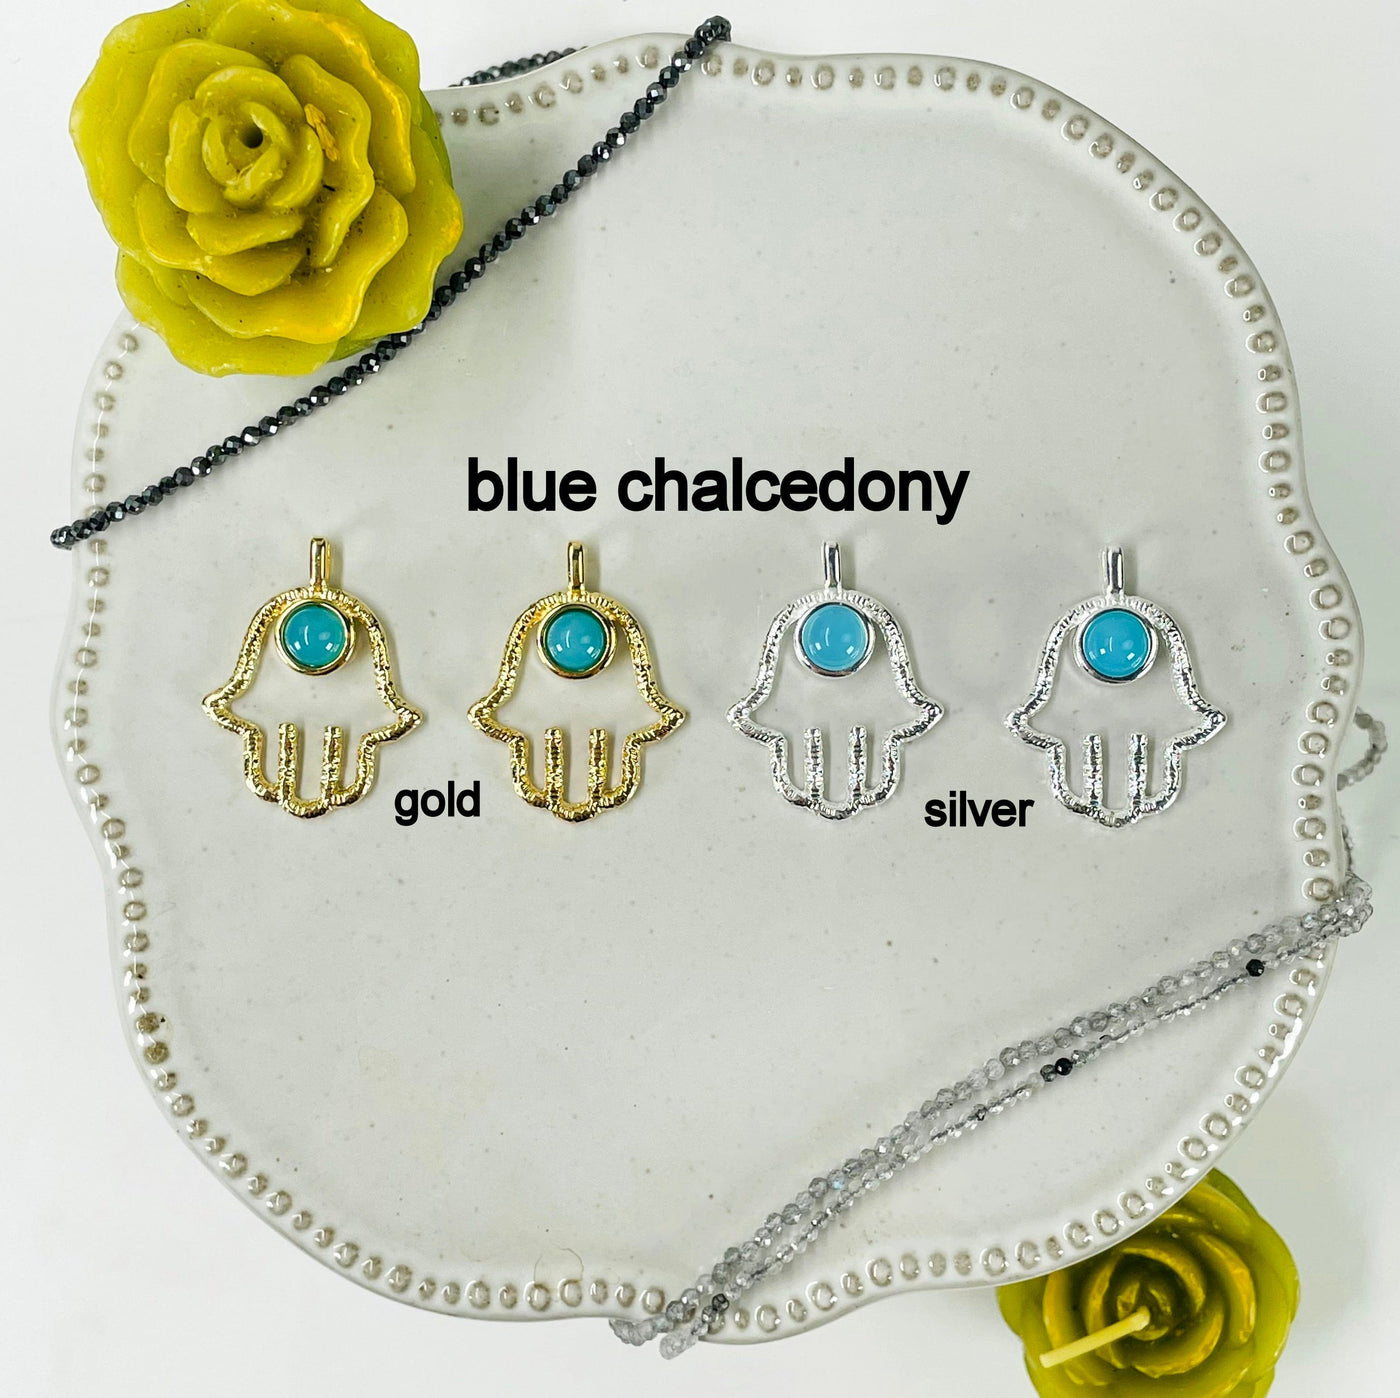 two gold and two silver hamsa hand pendants with blue chalcedony accent